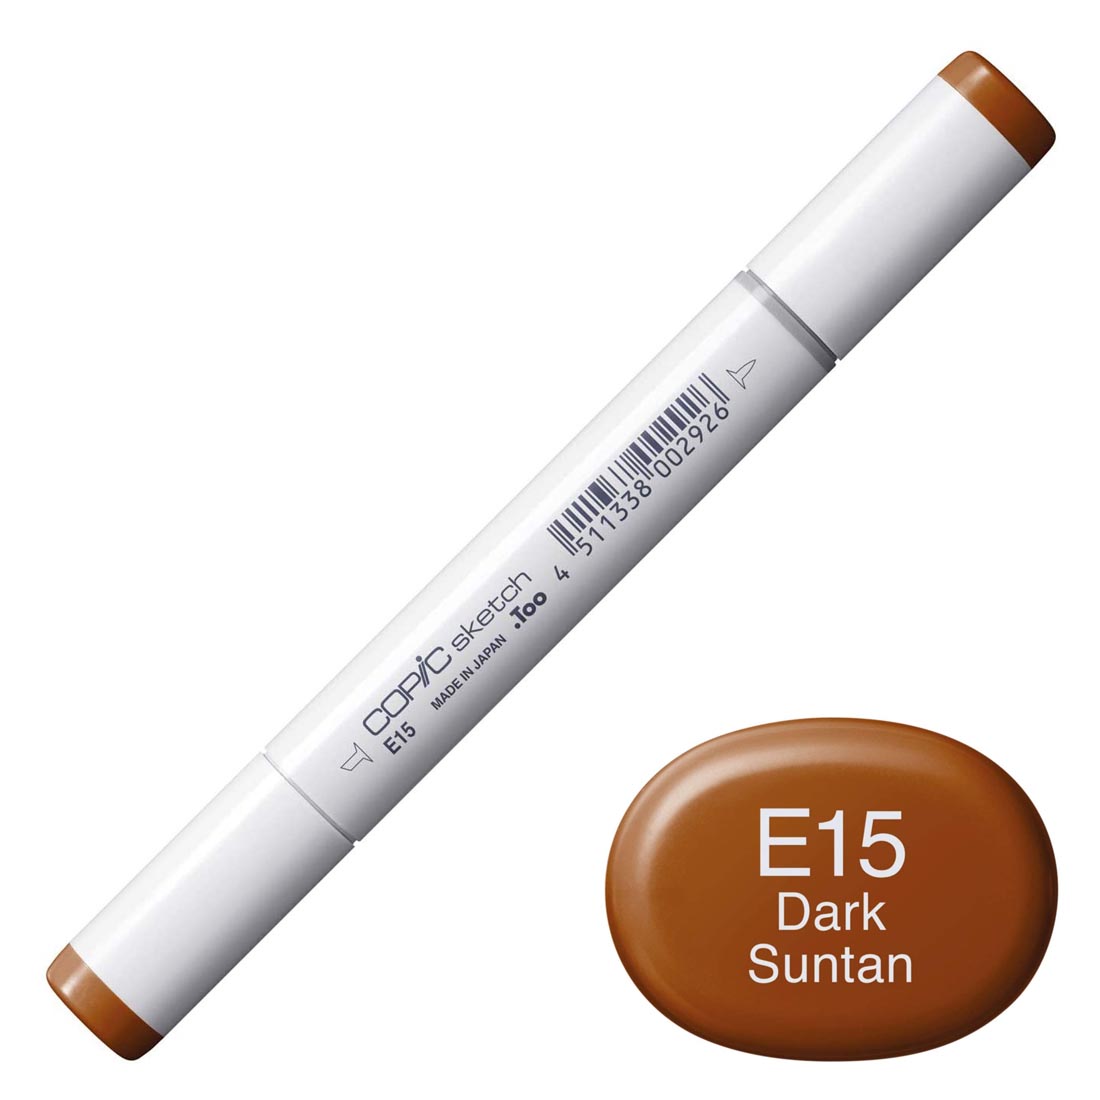 COPIC Sketch Marker with a color swatch and text of E15 Dark Suntan